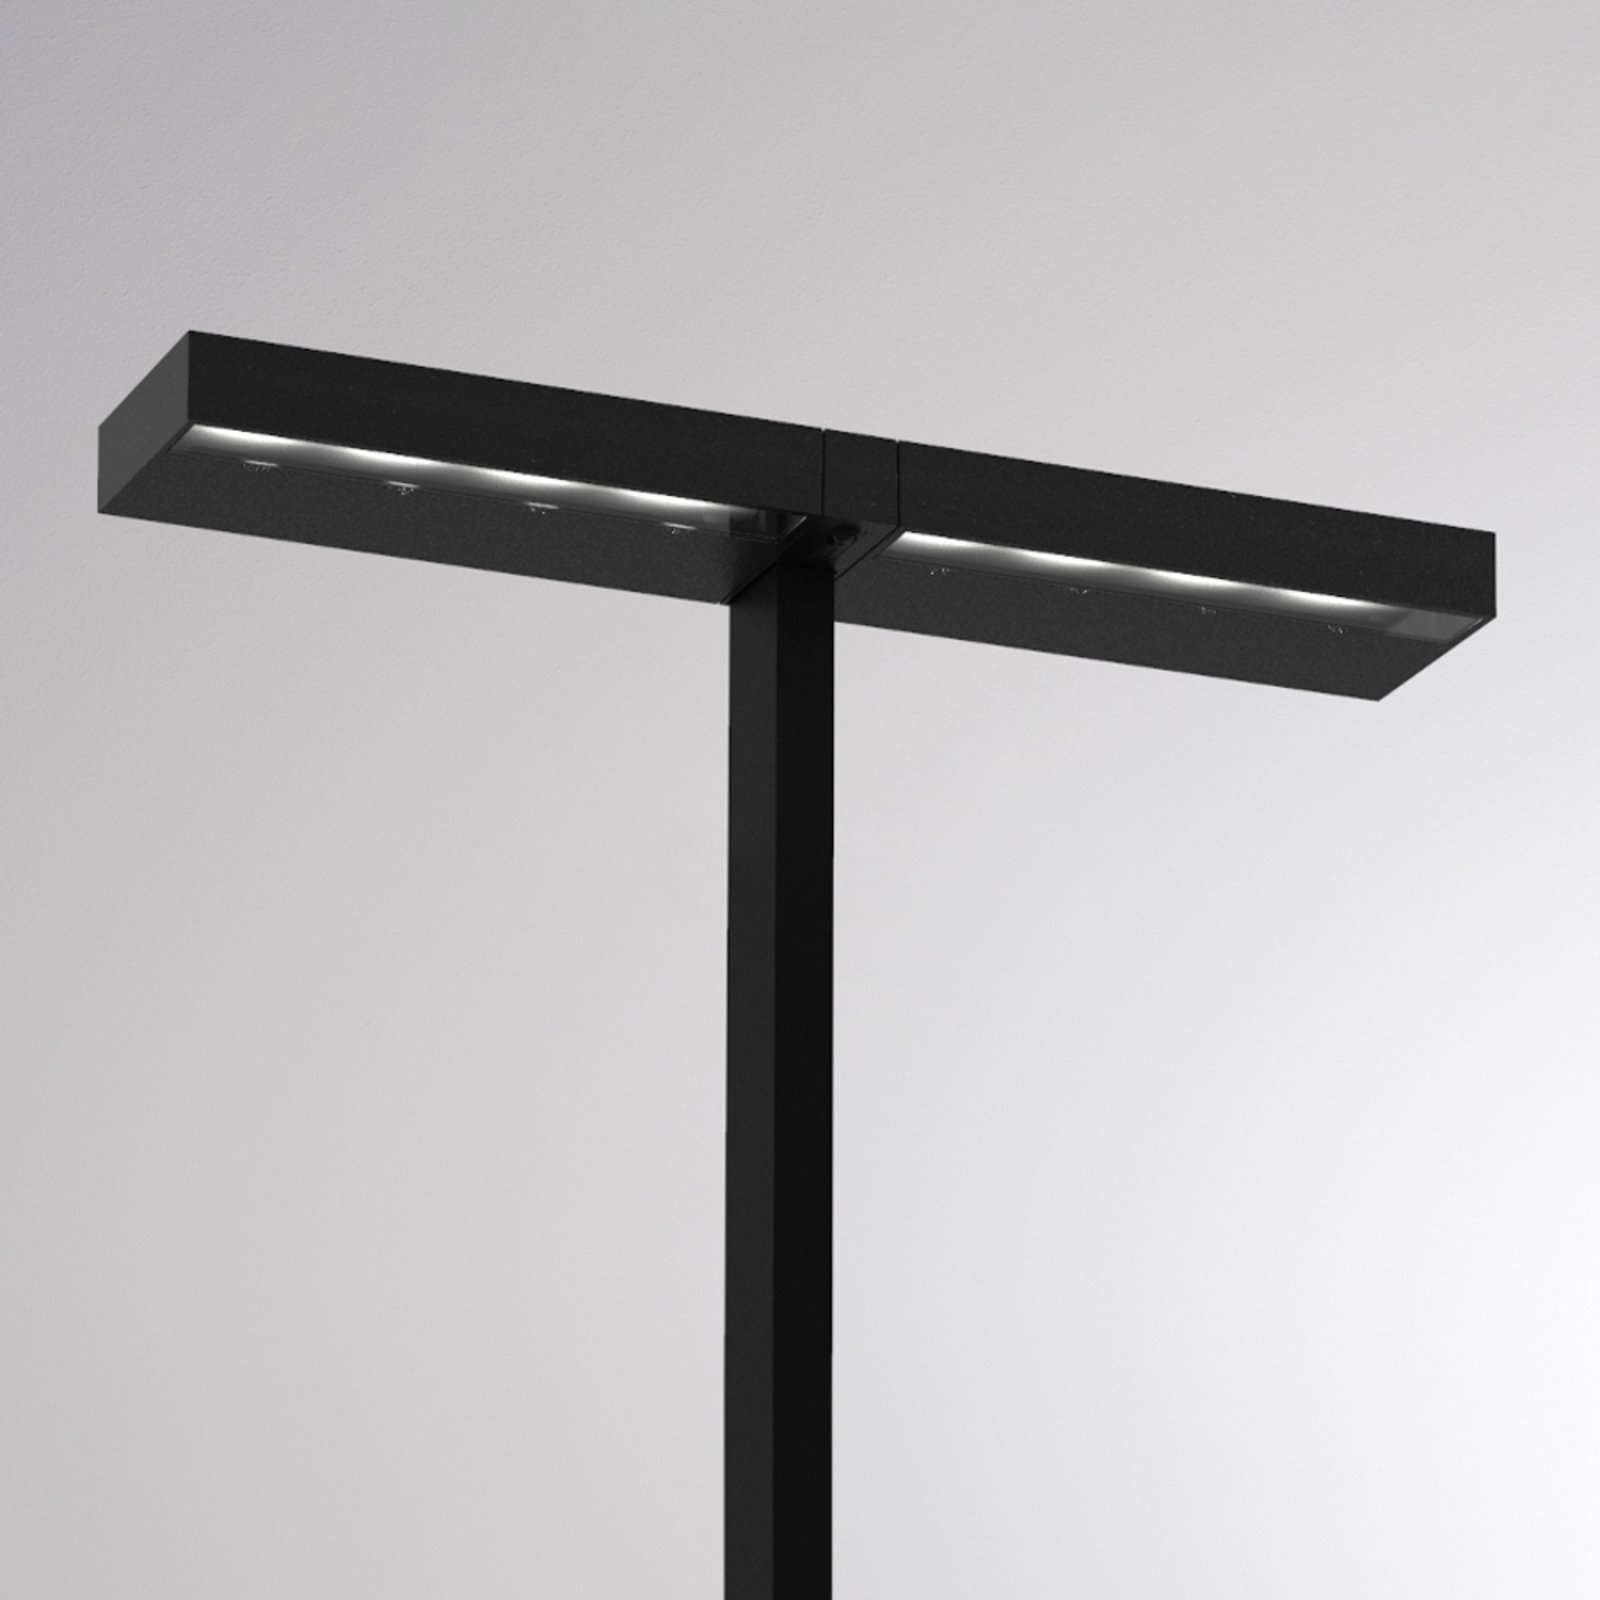 Molto Luce Concept Double F dimmable black